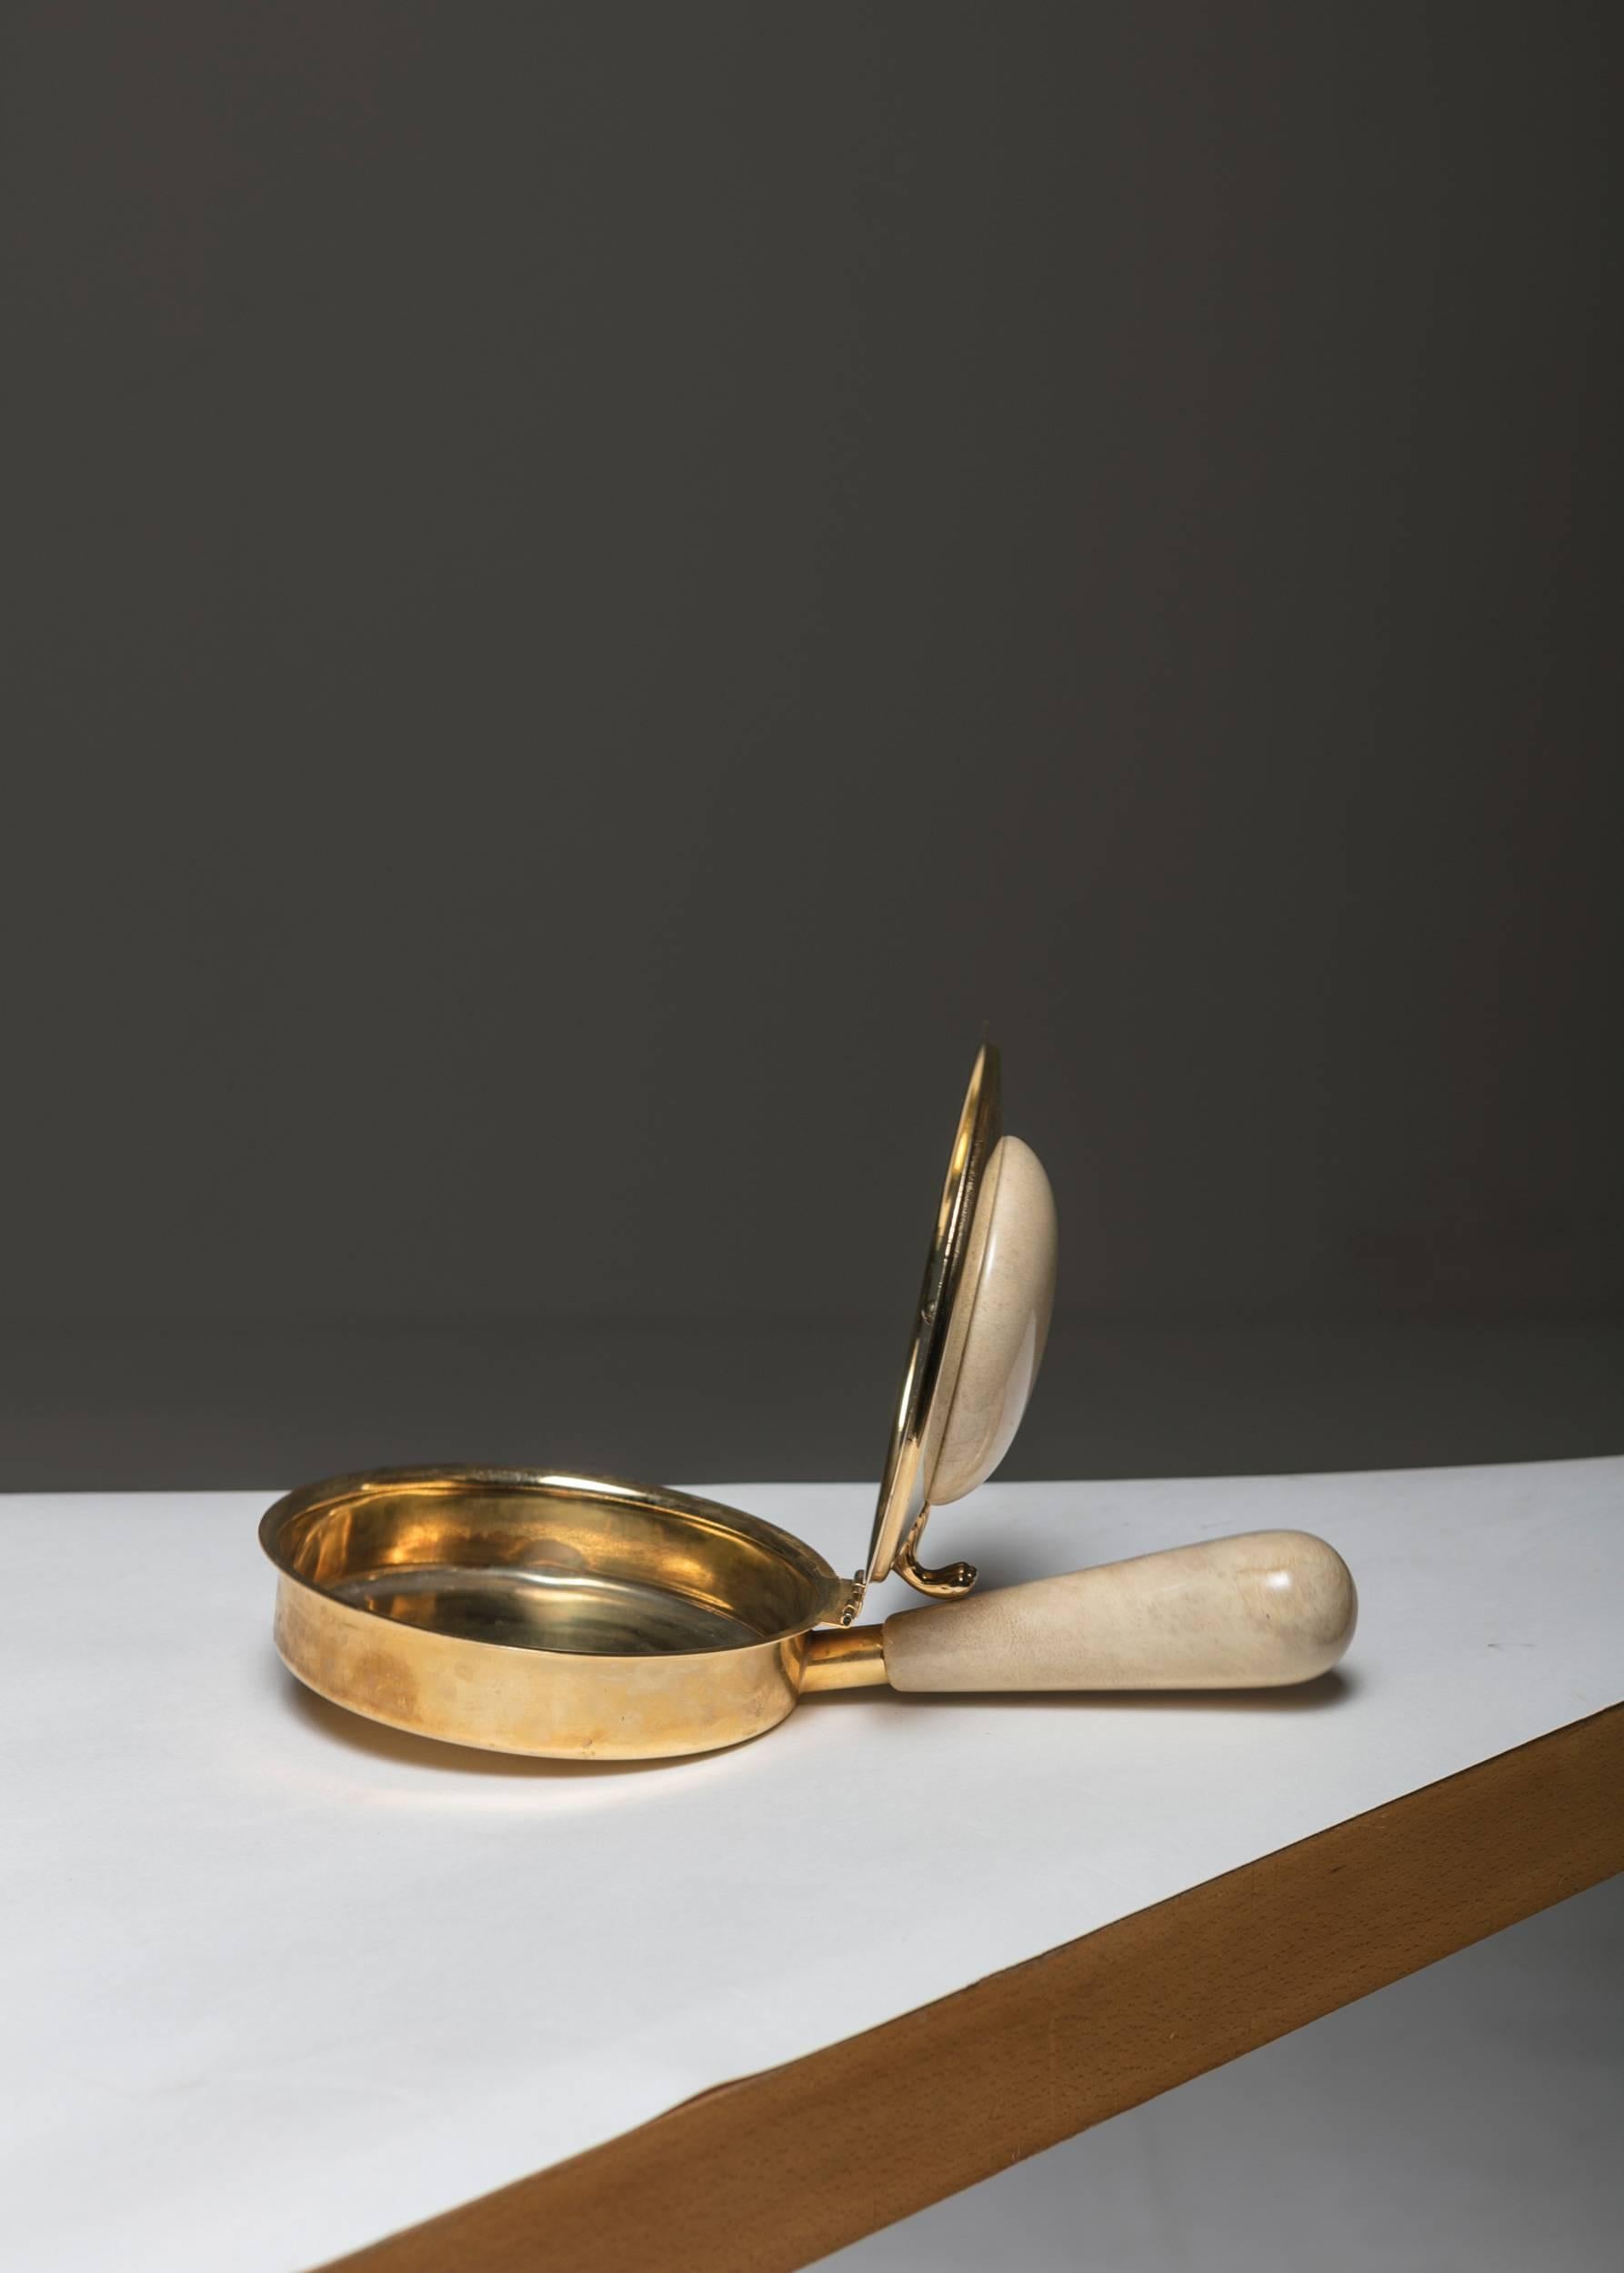 Beautifully detailed serving piece by Aldo Tura.